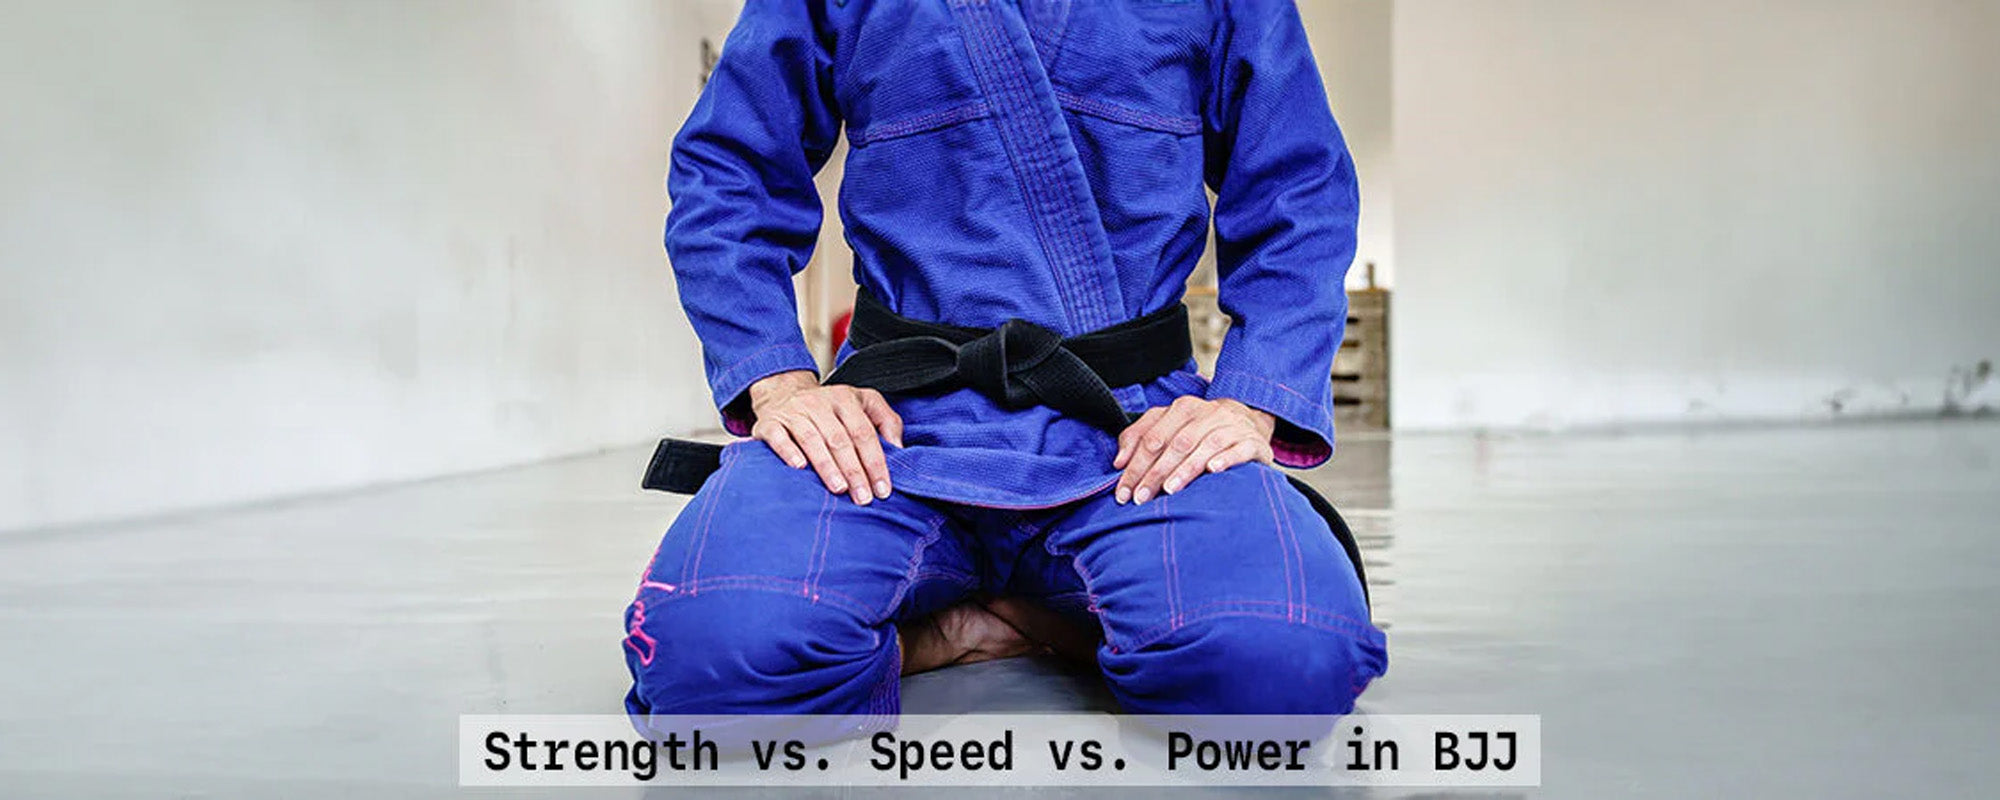 Strength vs. Speed vs. Power in BJJ: Which is More Important?